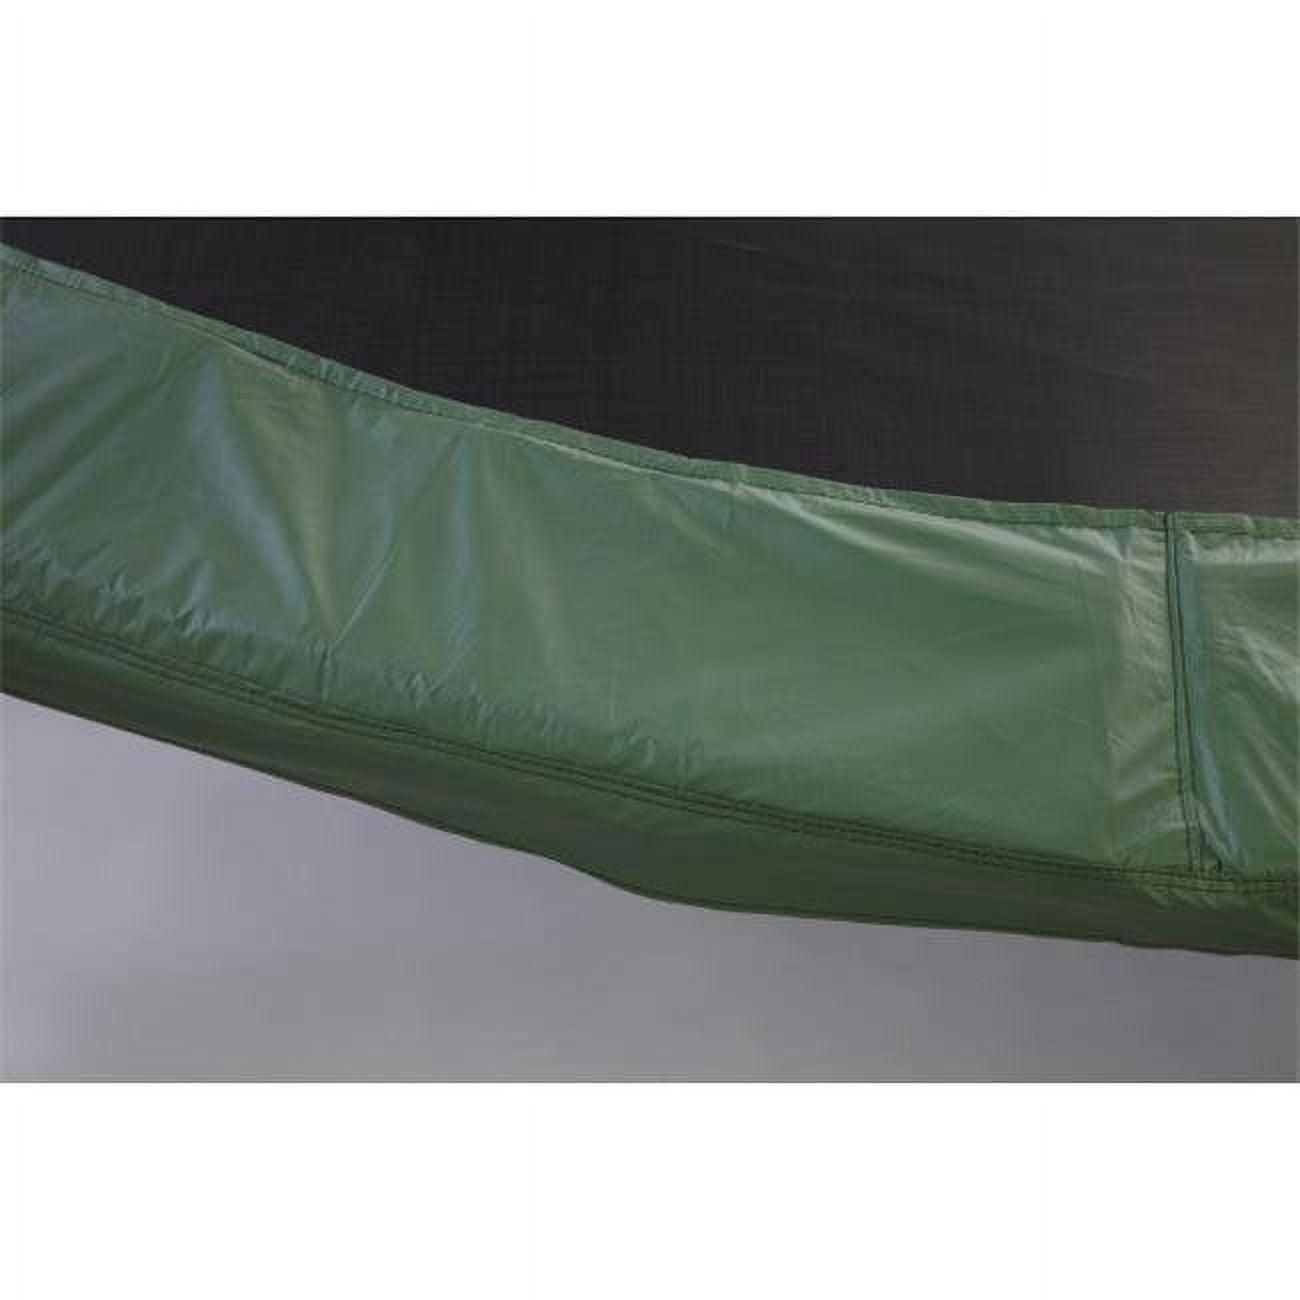 Picture of Jumpking PAD15-10G 15 ft. x 10 in. Wide Safety Pad  Green